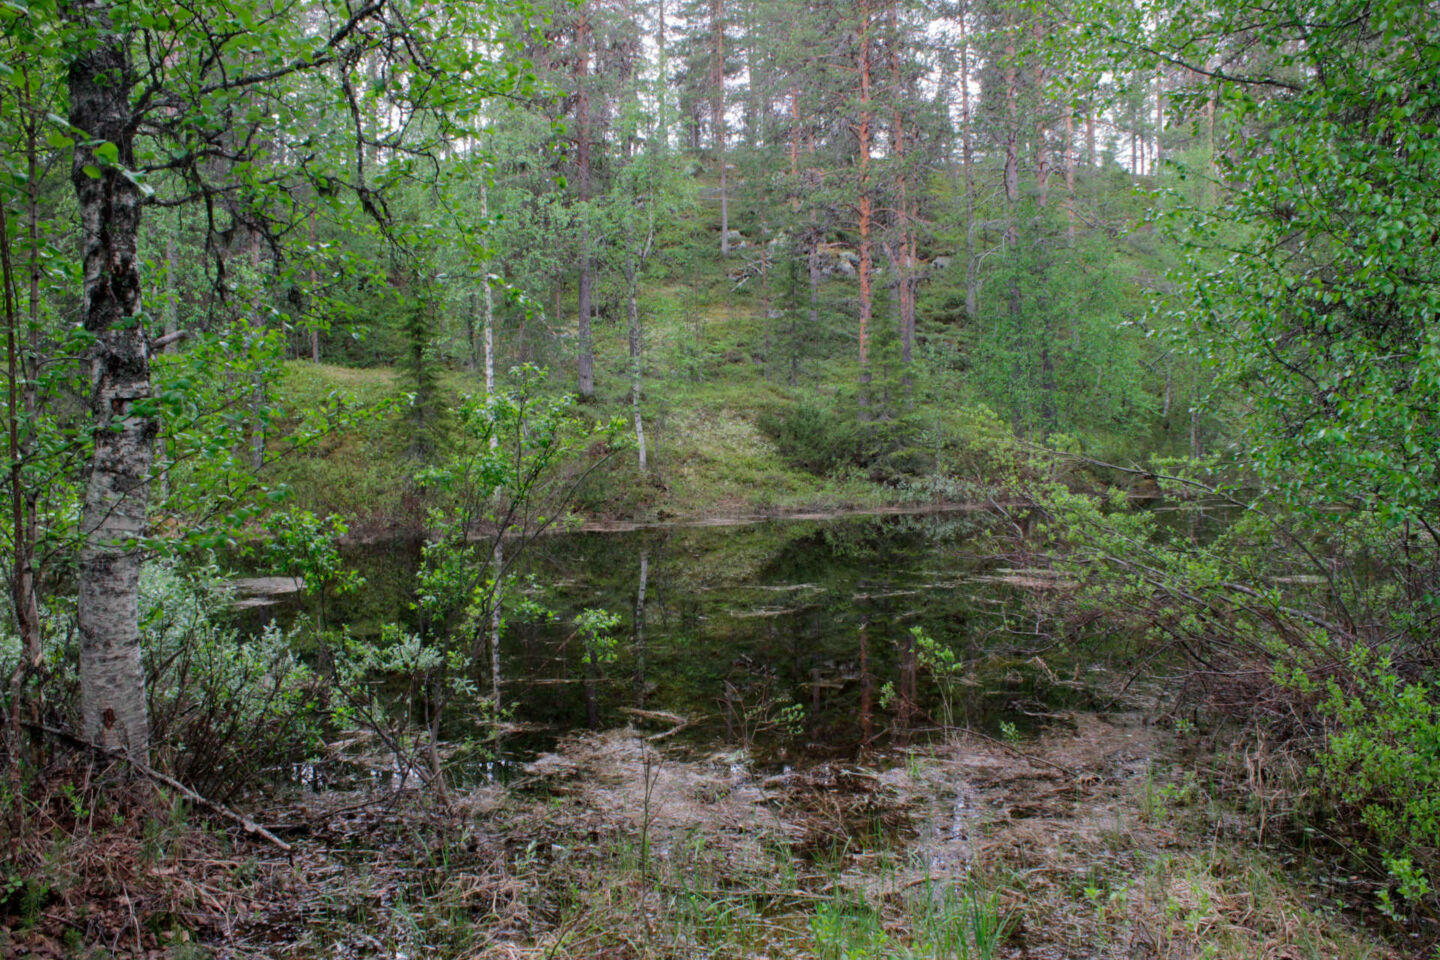 Pond and forest in Kittilä, Finland in summer, a stand-in location for backwaters like found in New England